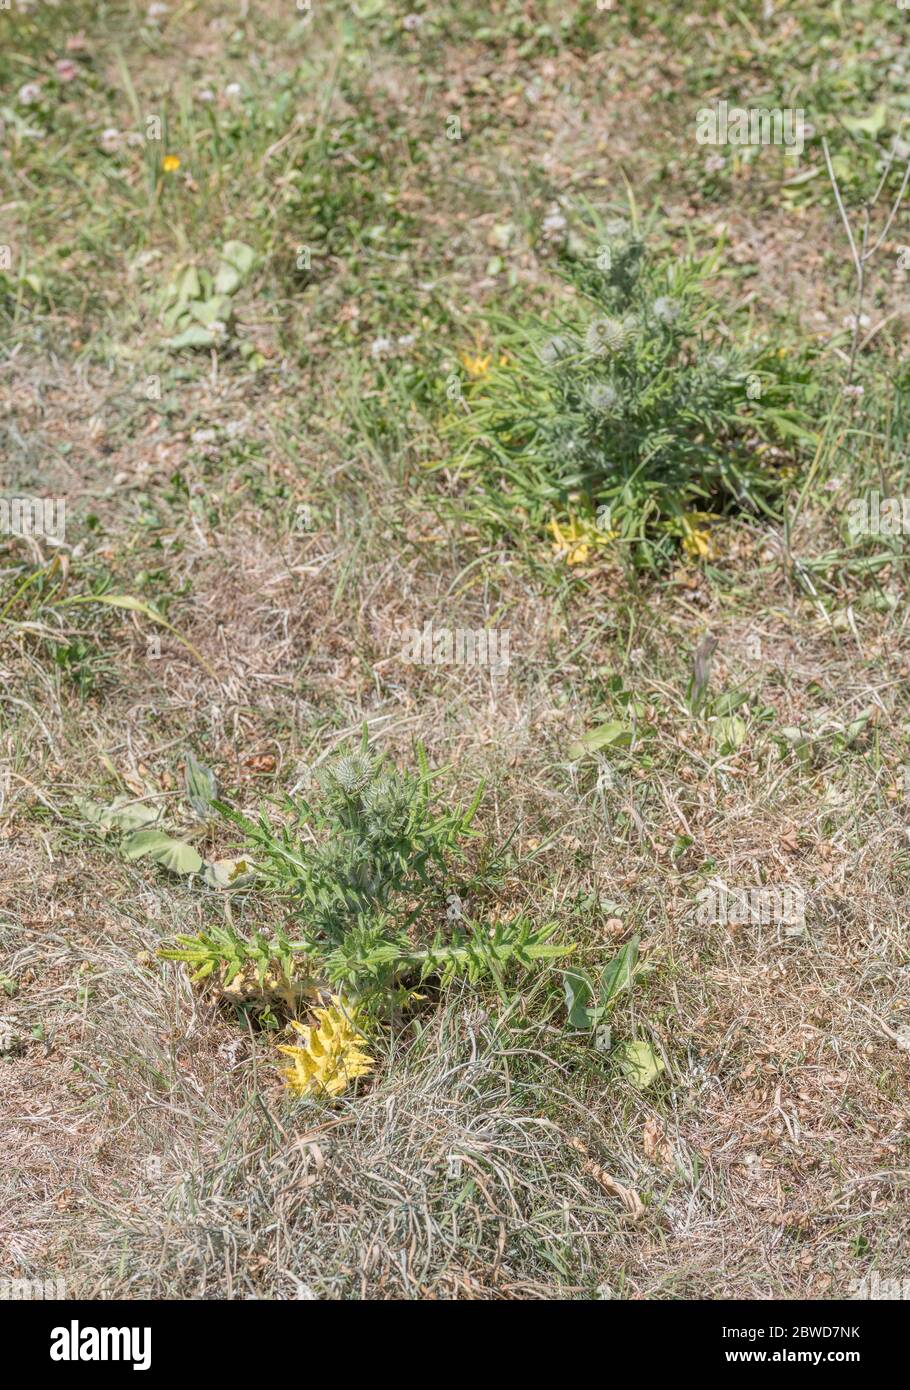 Dying Spear Thistle / Cirsium vulgare plant poisoned by some herbicide in field area. Troublesome UK agricultural weed. Death by poisoning concept. Stock Photo